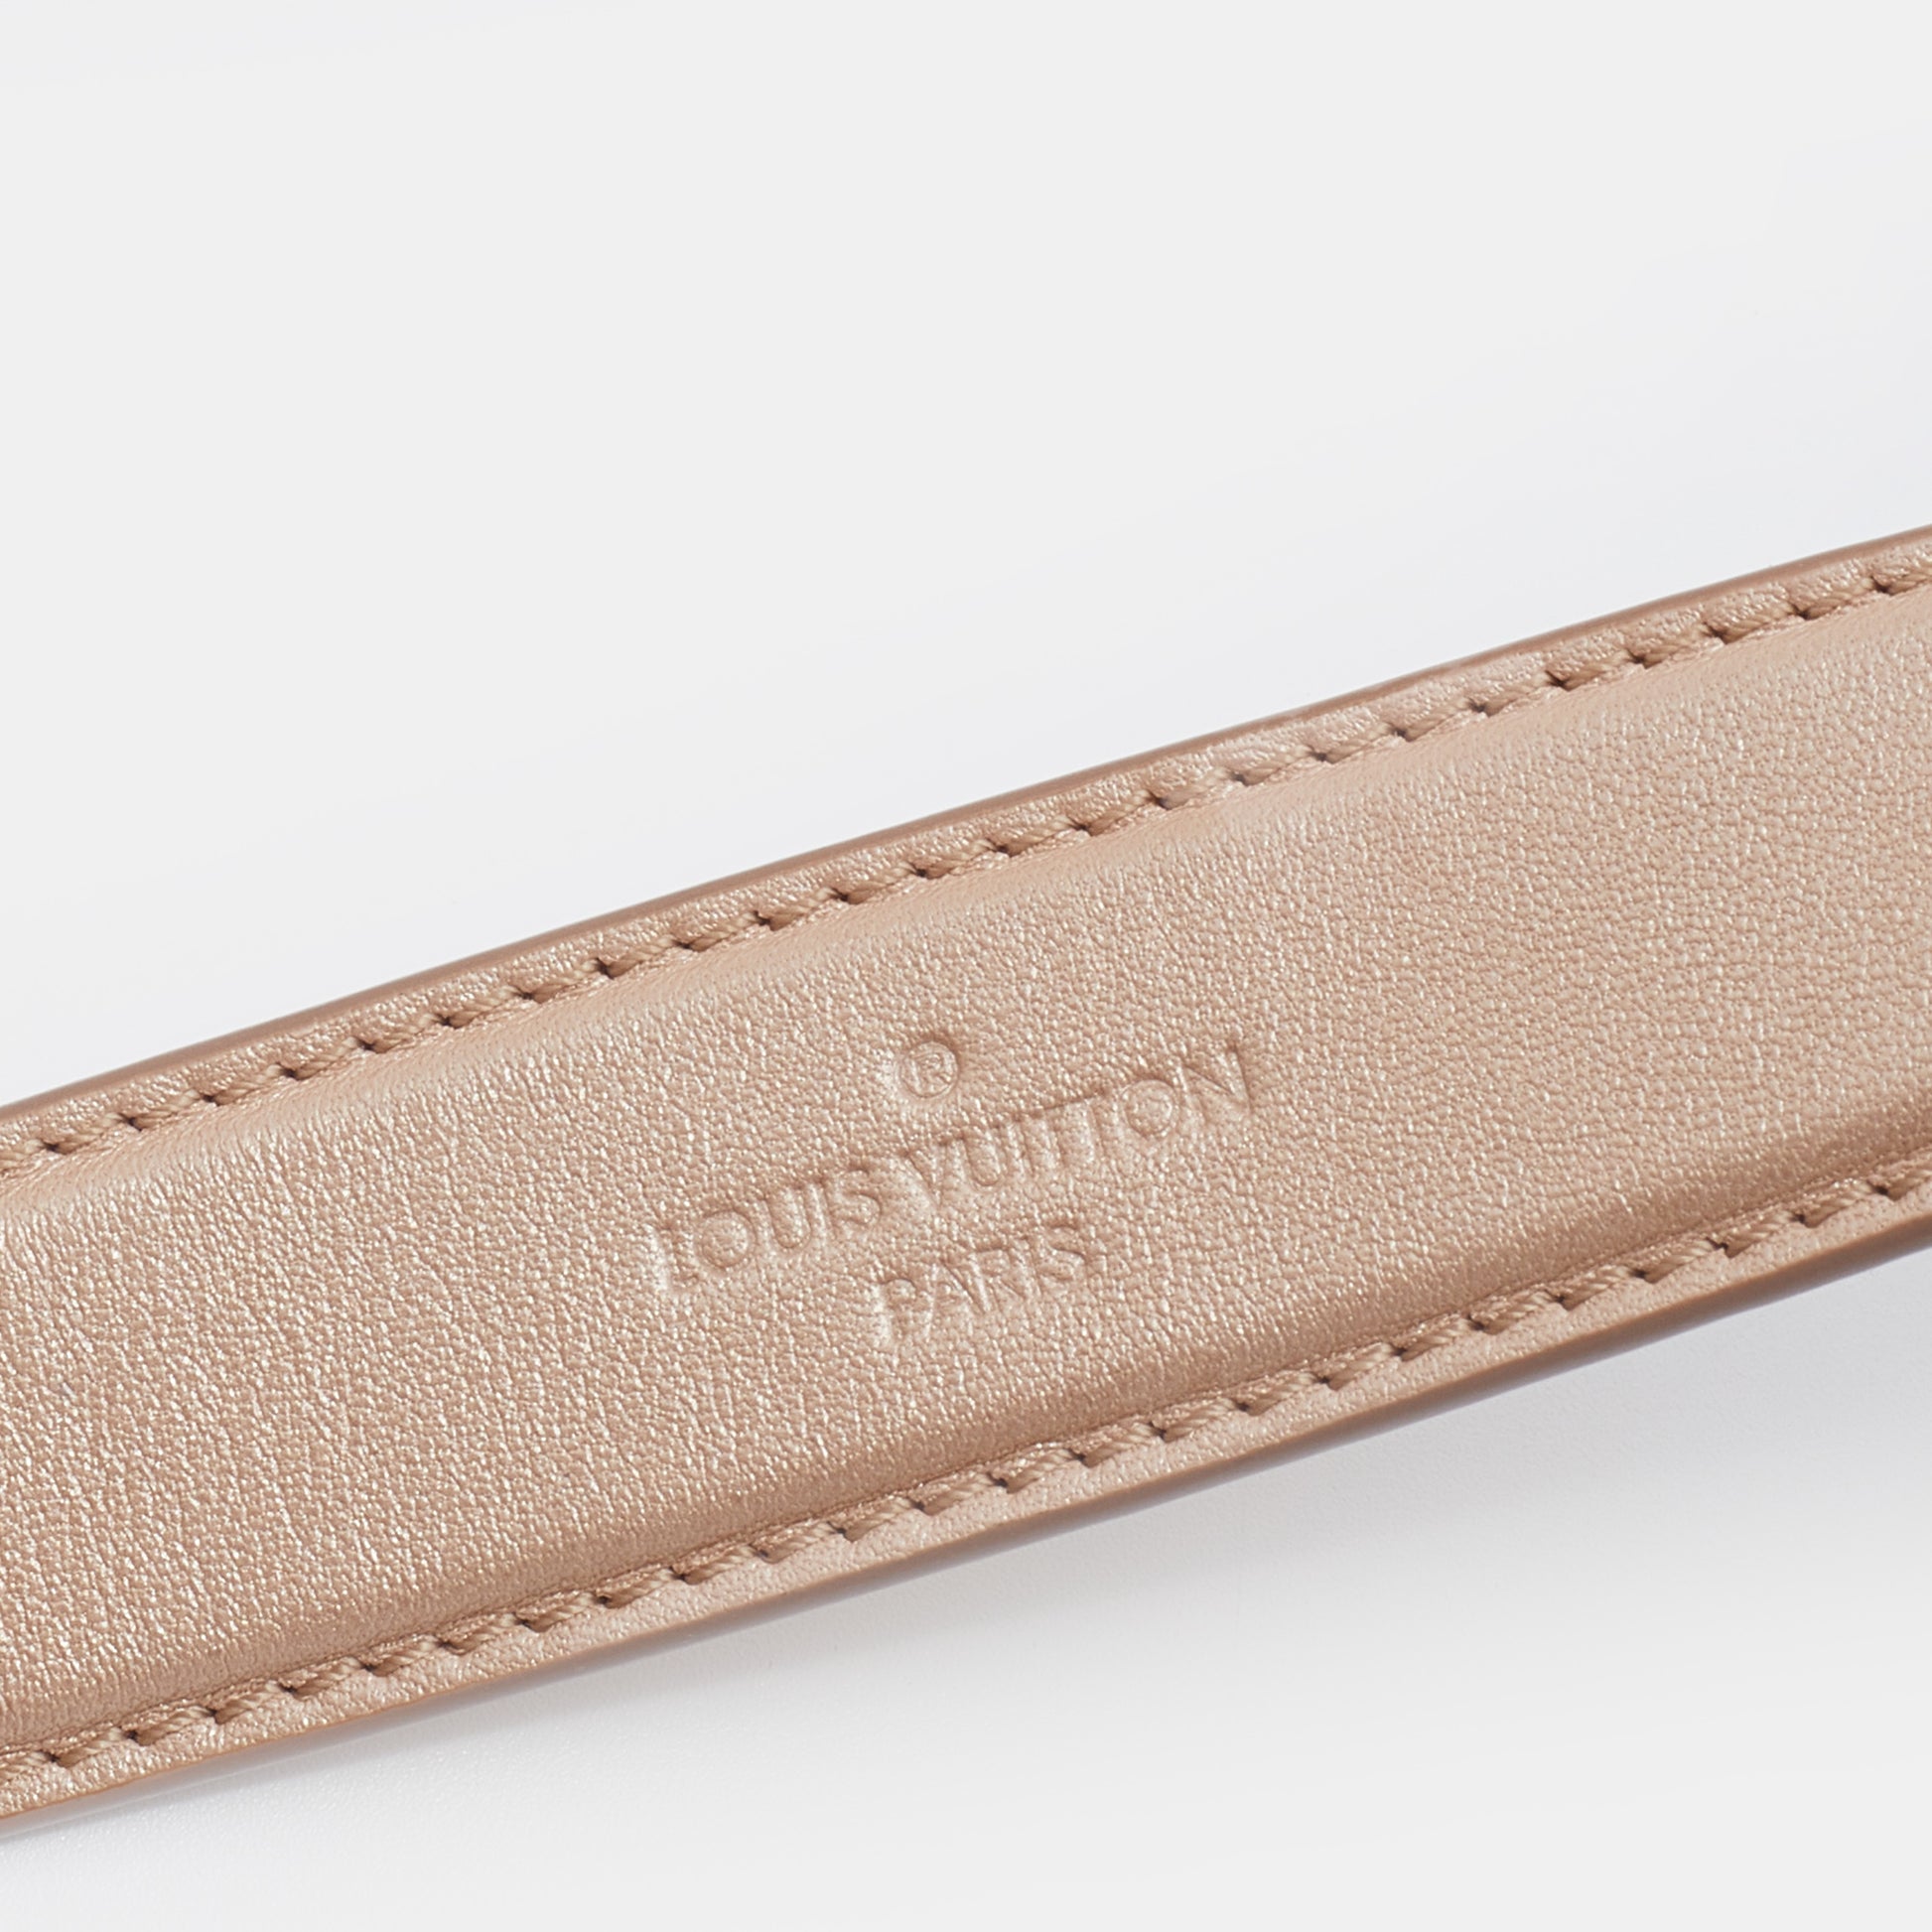 Louis Vuitton on X: Introducing the GO-14. From the lambskin leather and  gilded finishes to the bag's Malletage quilting, the #LVGO14 calls on the  expertise of #LouisVuitton's ateliers – perpetuating the Maison's